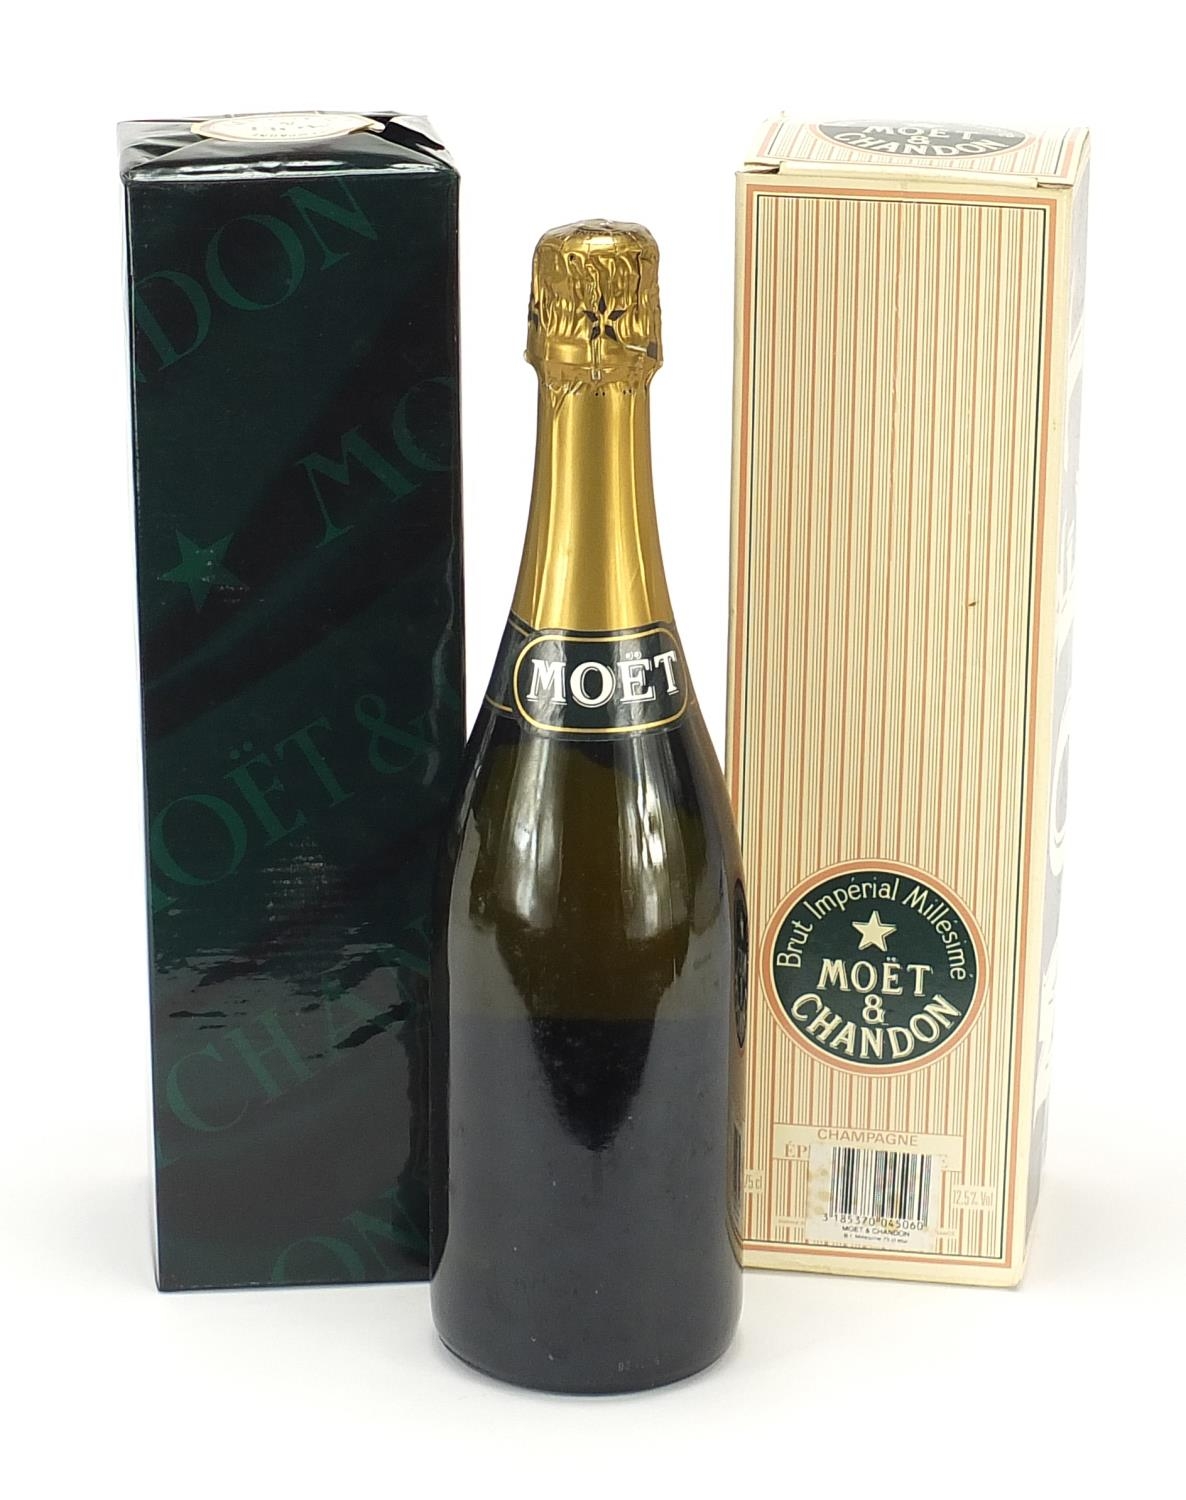 Two bottles of Moet & Chandon Champagne with boxes, one sealed including Brut Imperial 1986 : For - Image 2 of 2